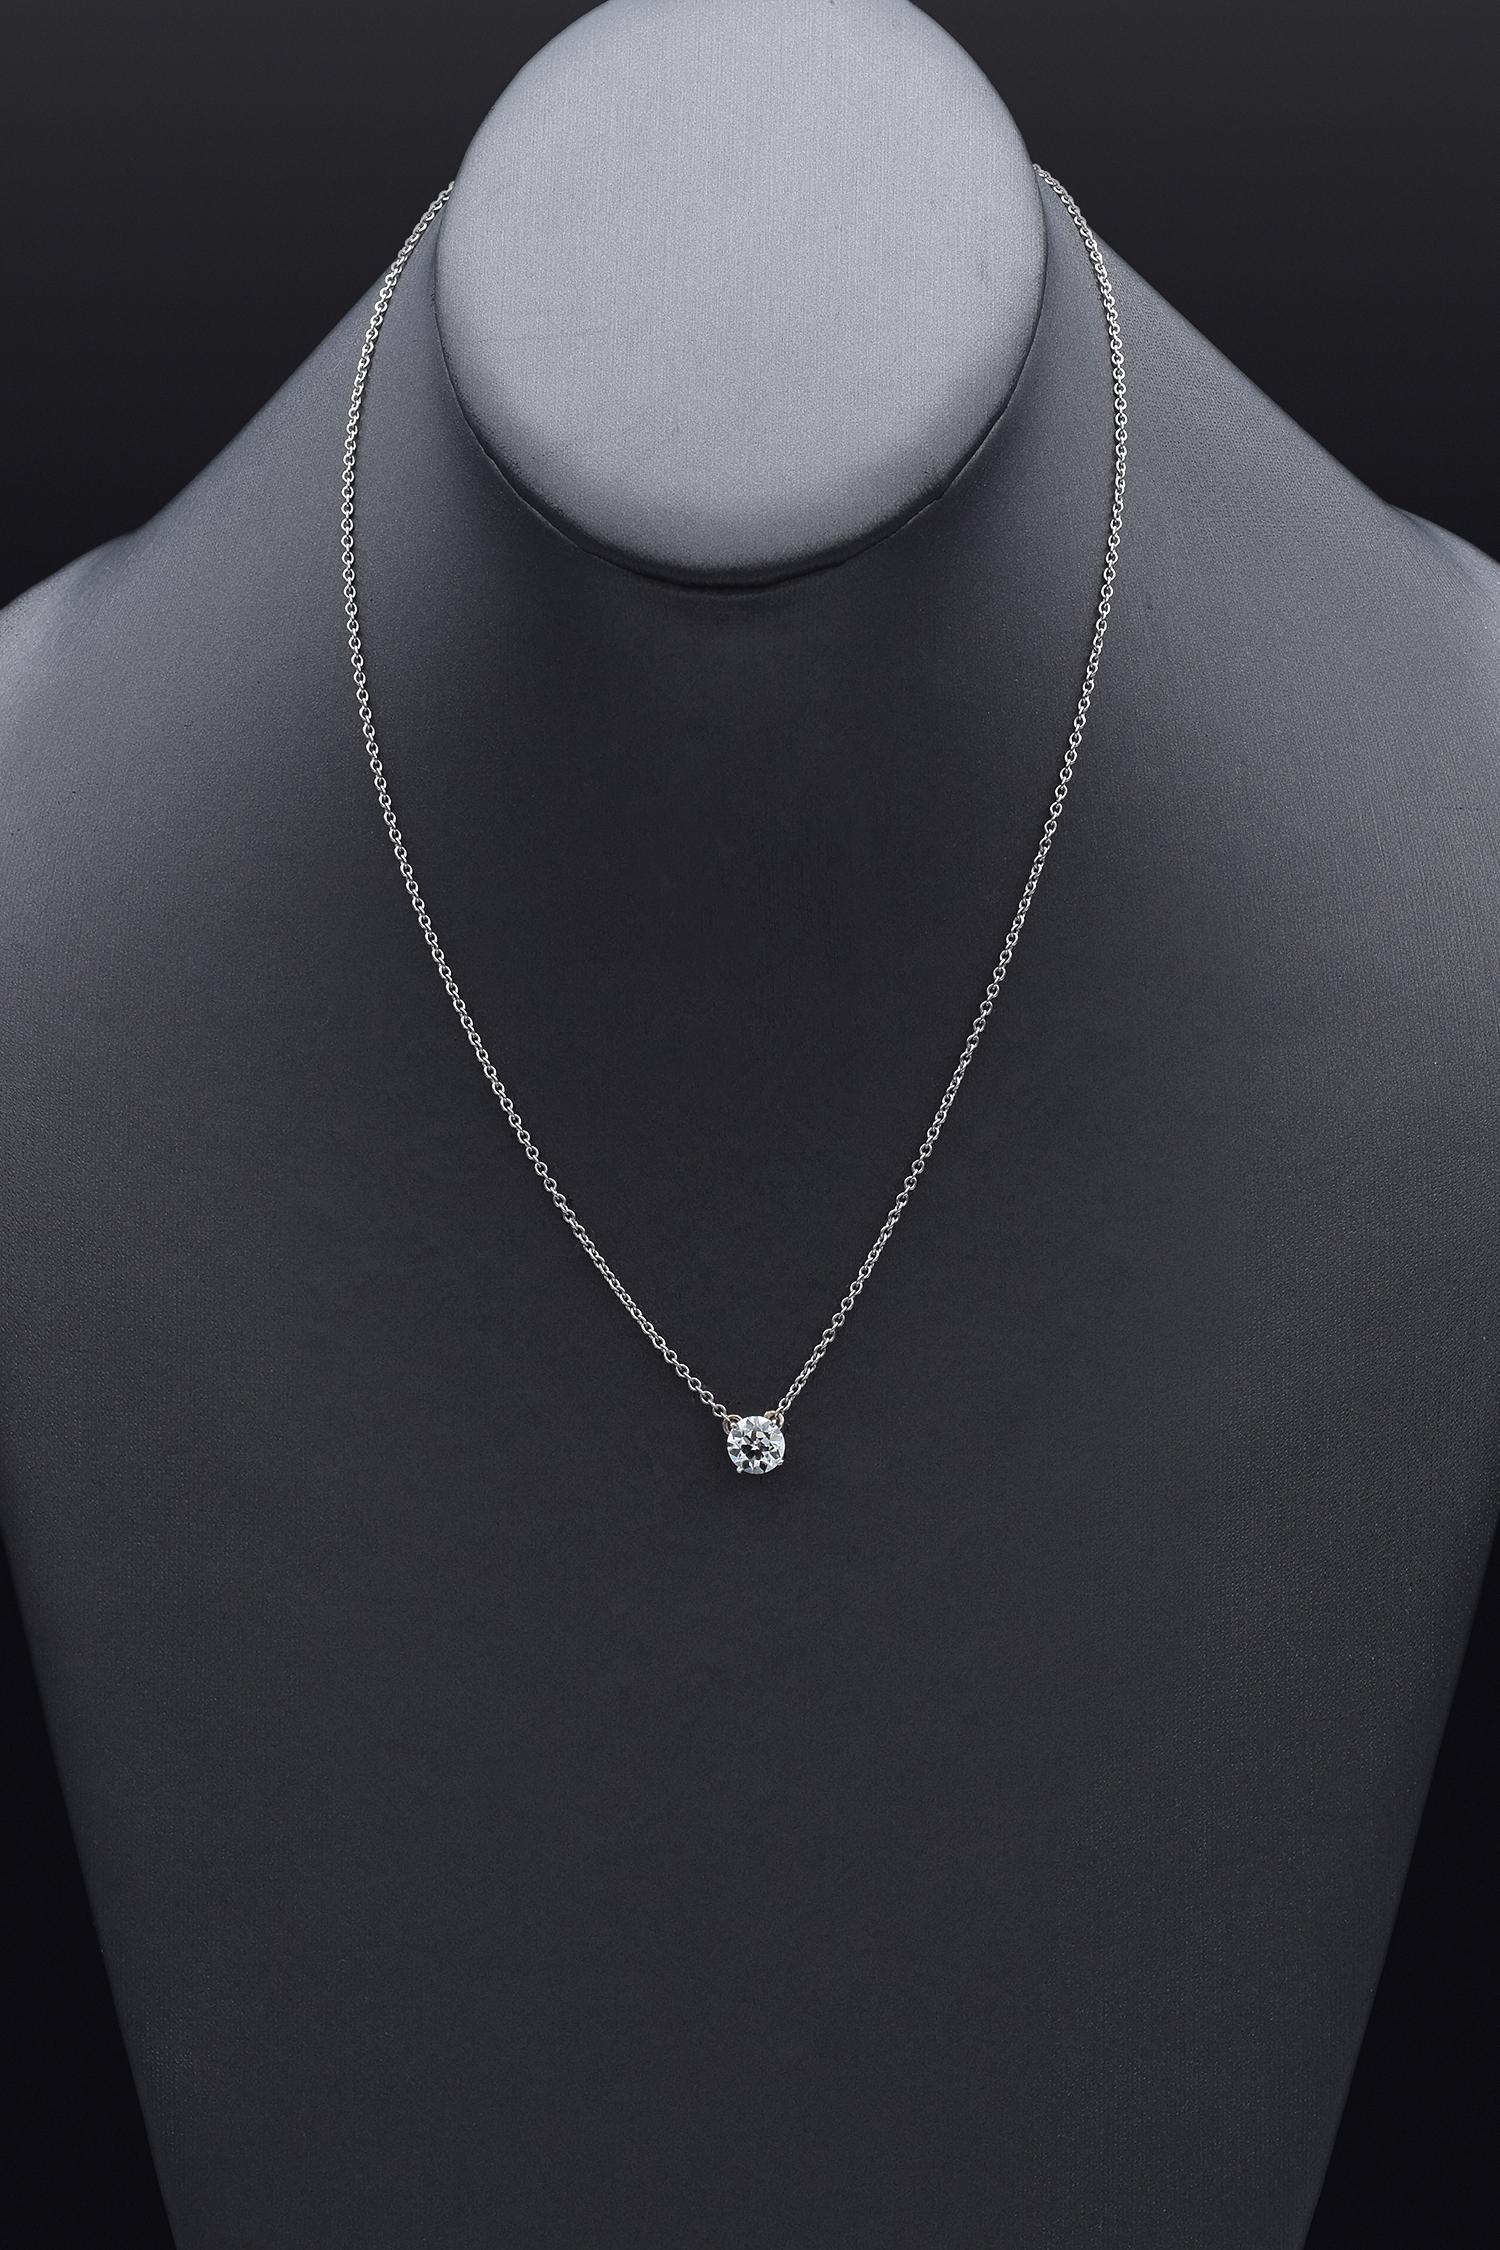 Weight: 3.4 Grams
Stone: Approx 1.23 Ct (6.9x6.9x4.1 mm) Diamond
Pendant: 6.9 mm
Chain Length: 17.5 Inches
Hallmark: 14K

ITEM #: BR-1078-101823-19